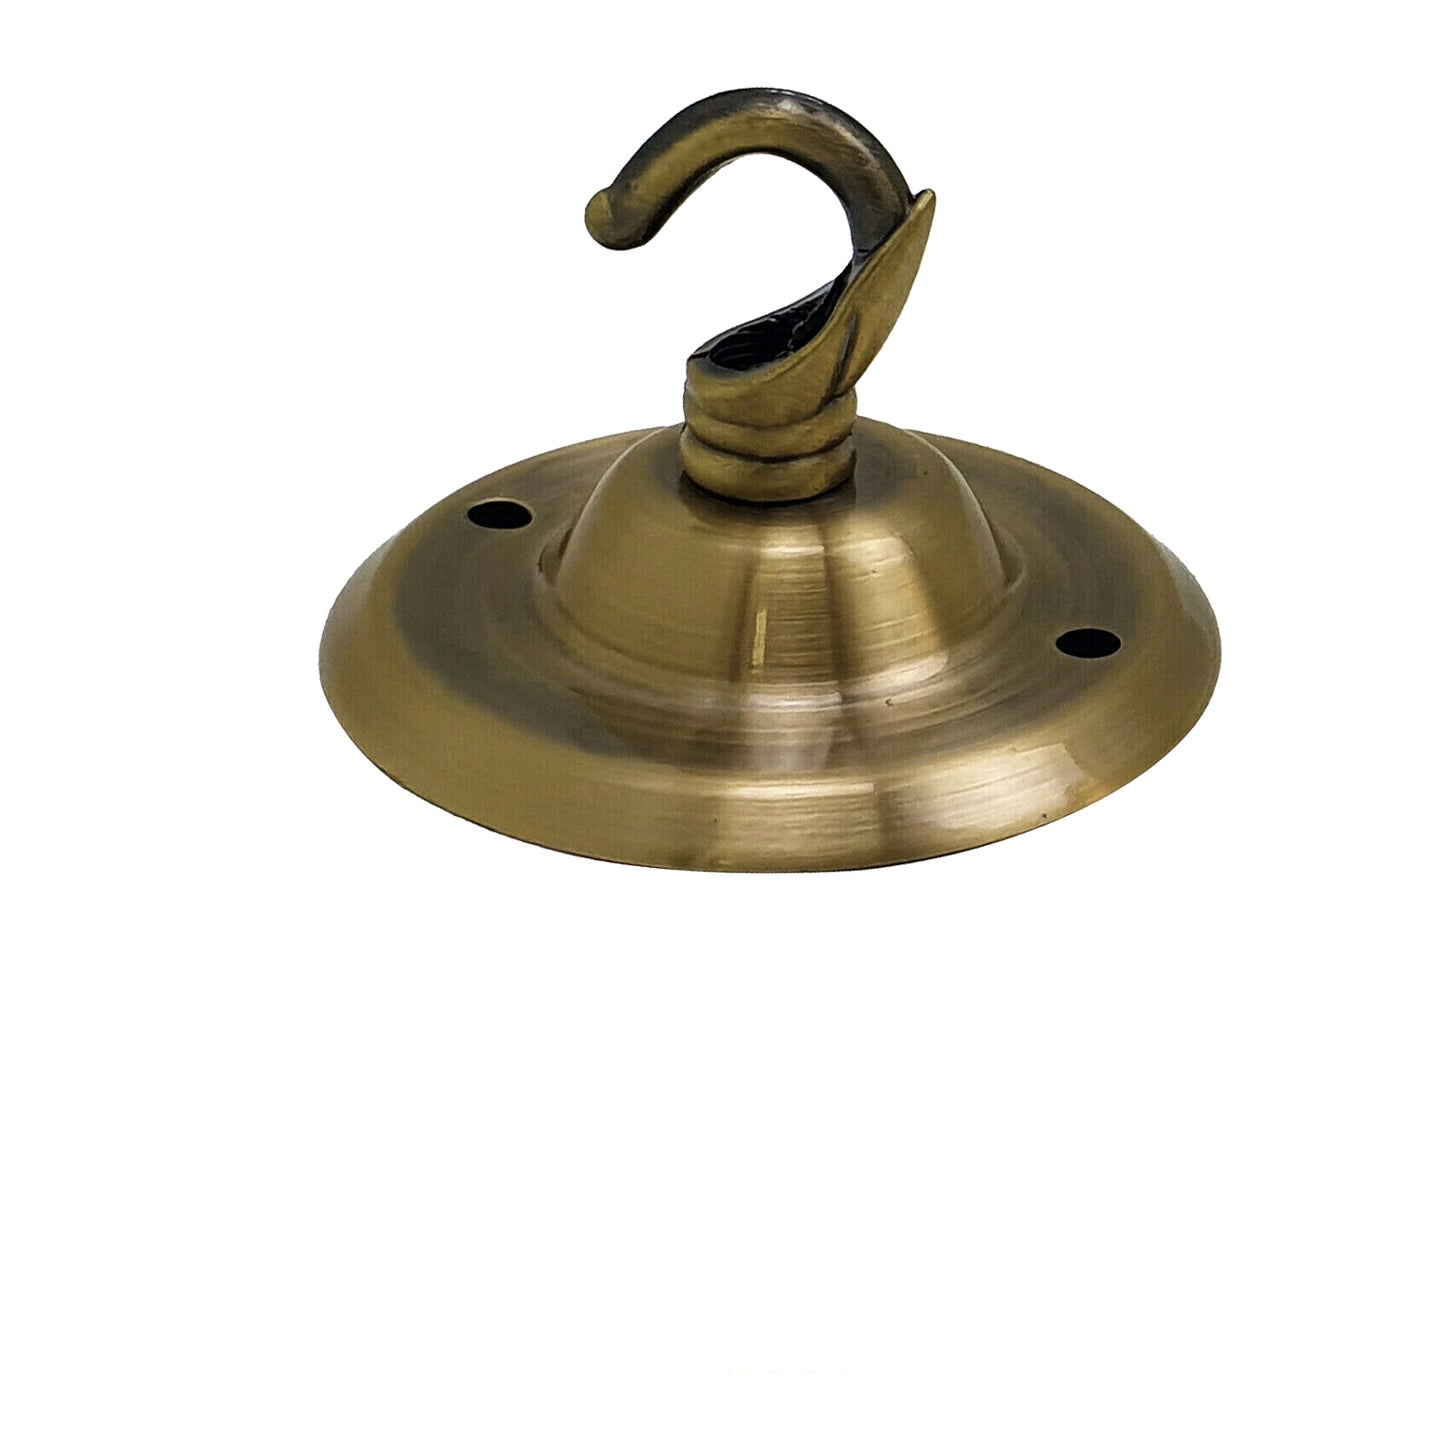 75mm Front Fitting Color Ceiling Hook With Single Point Drop Outlet Plate